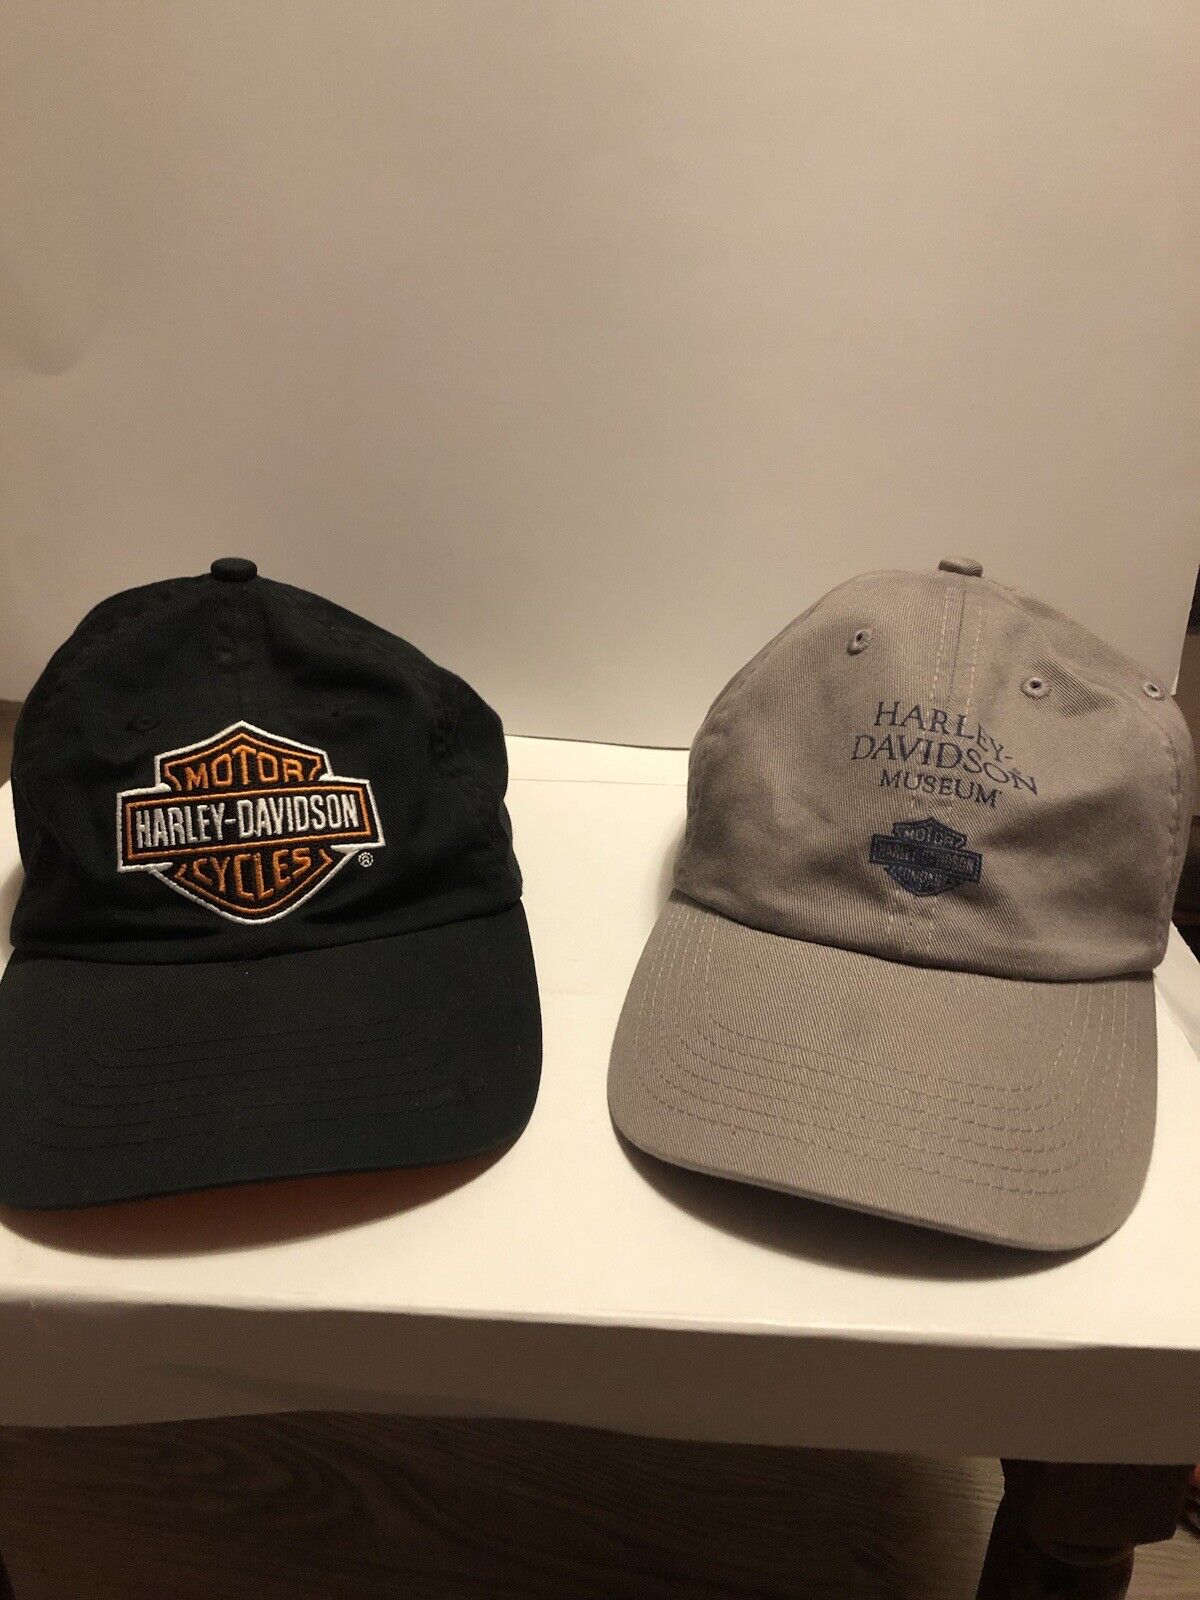 Two Harley Davidson Hats One Is From The Harley Davidson museum